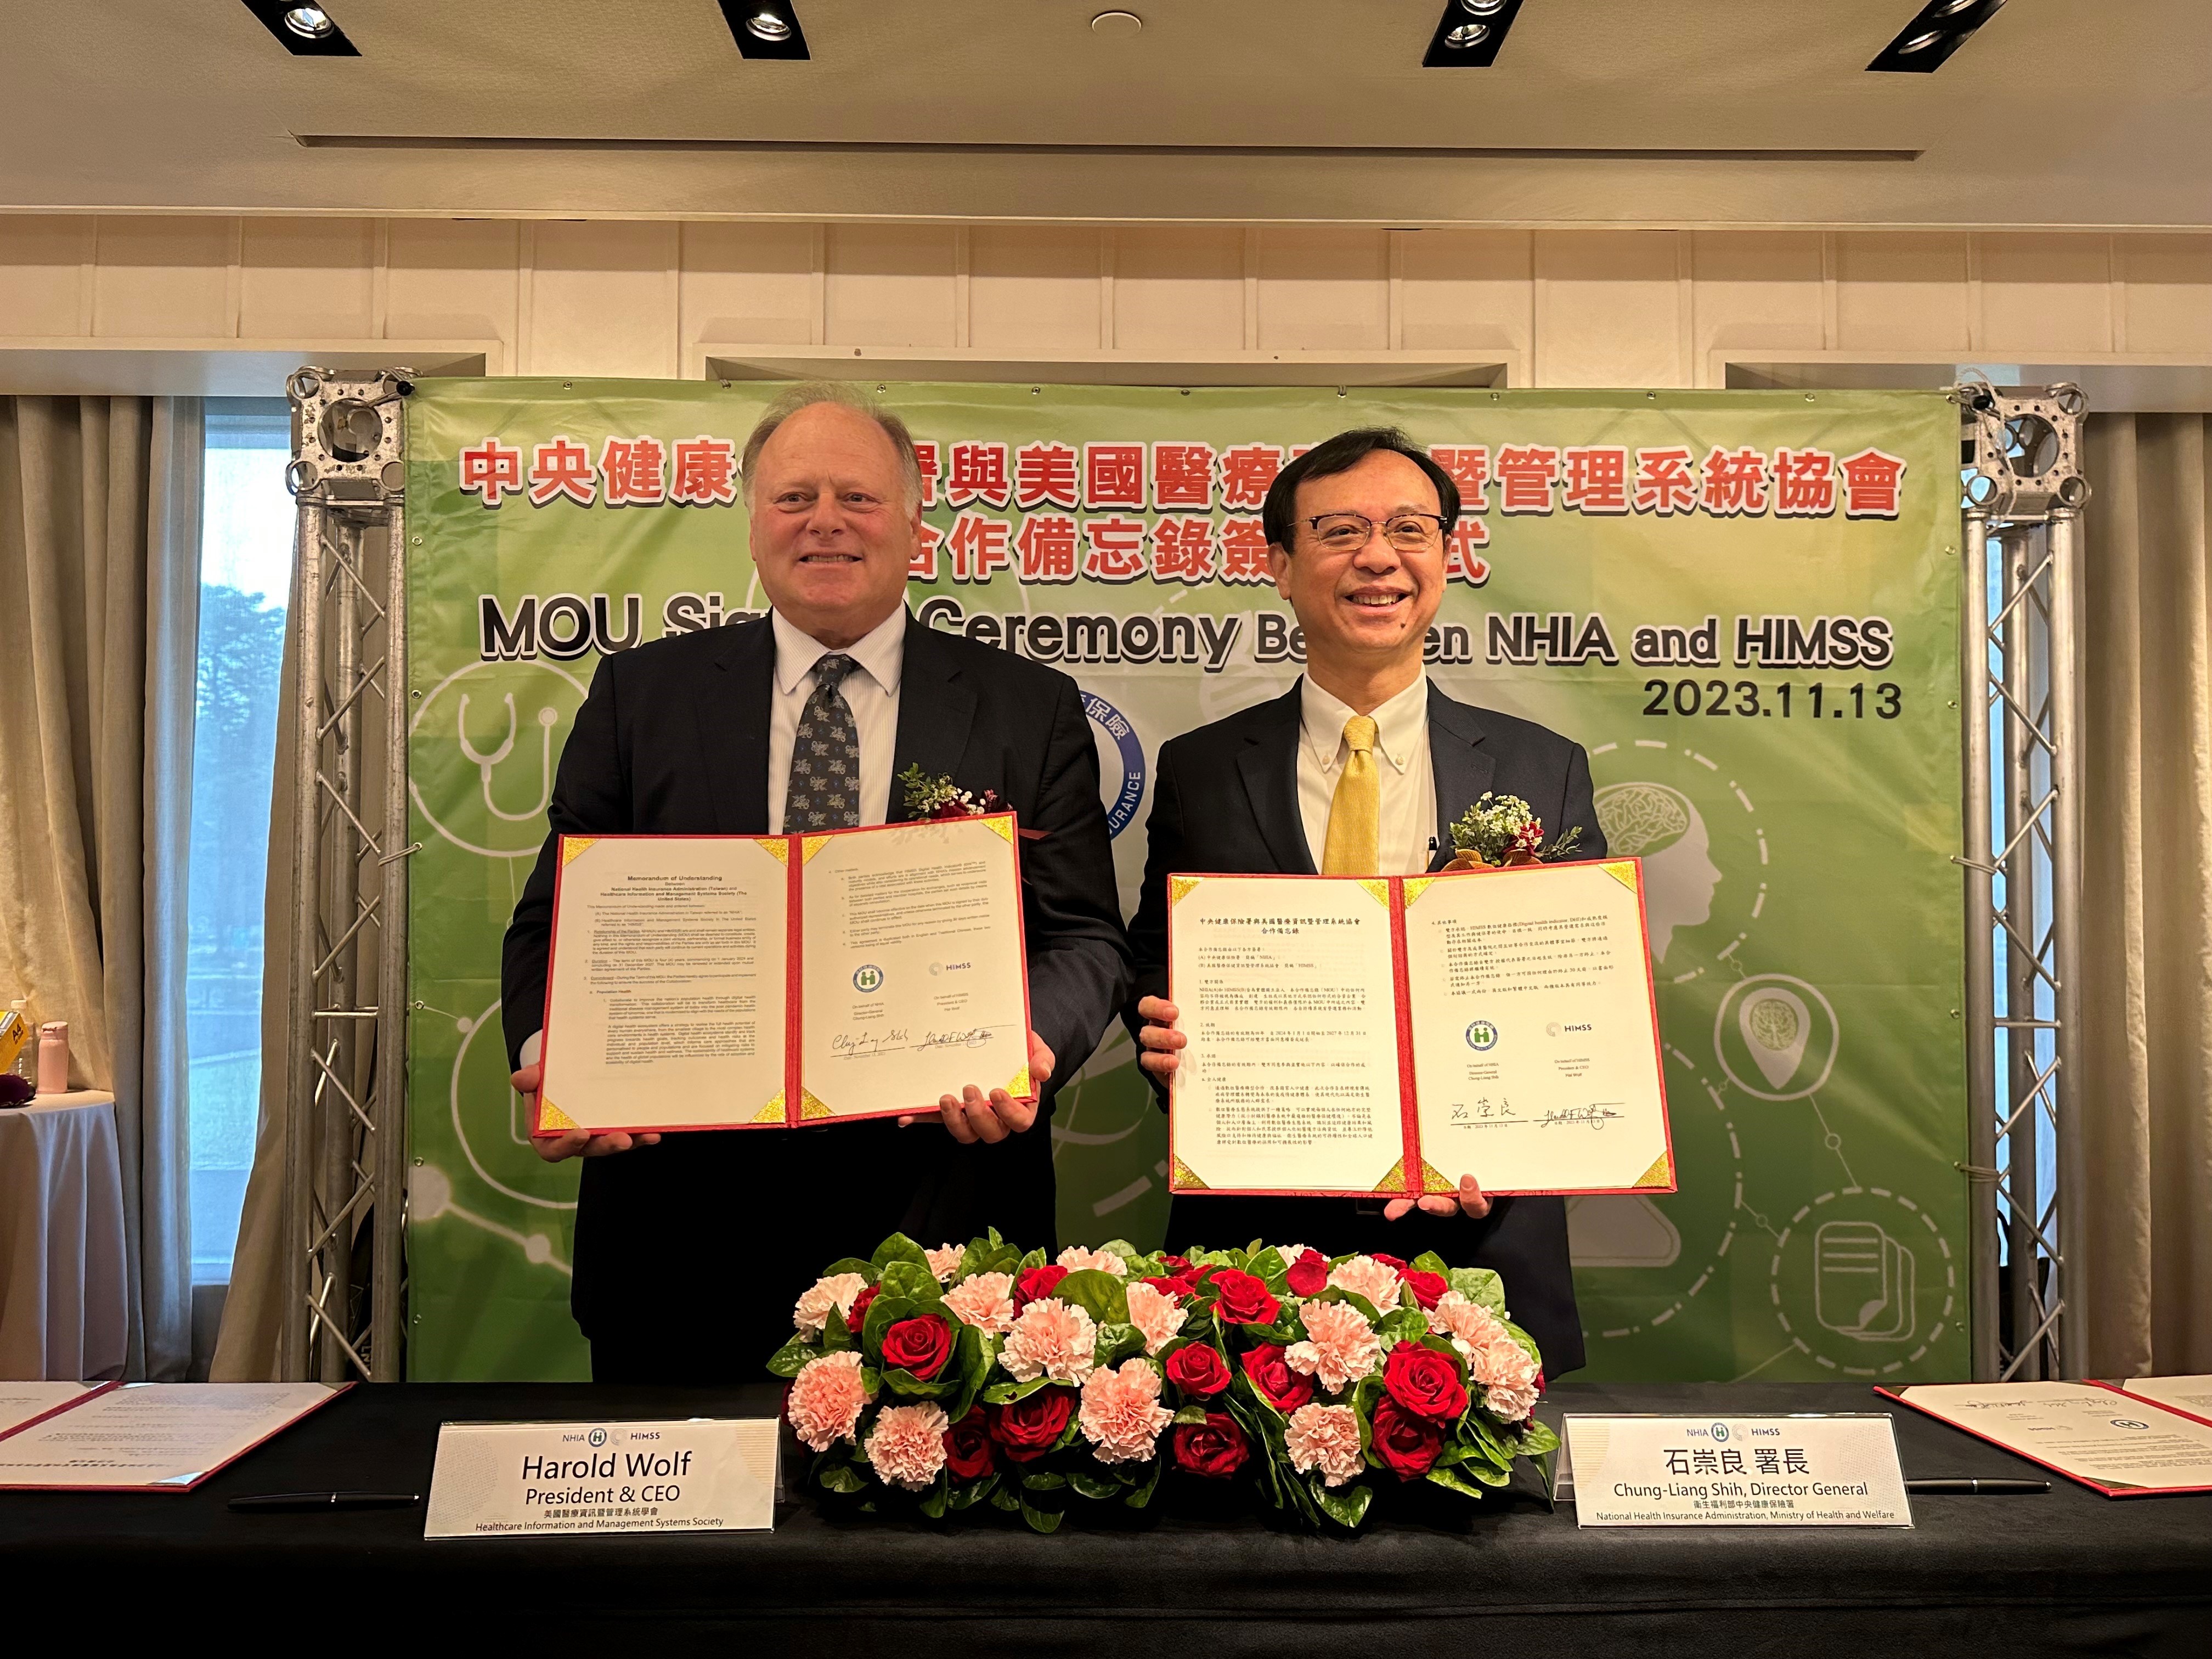 MOU Signed Between NHIA and HIMSS of the US Marks New Milestones in Digital Transformation